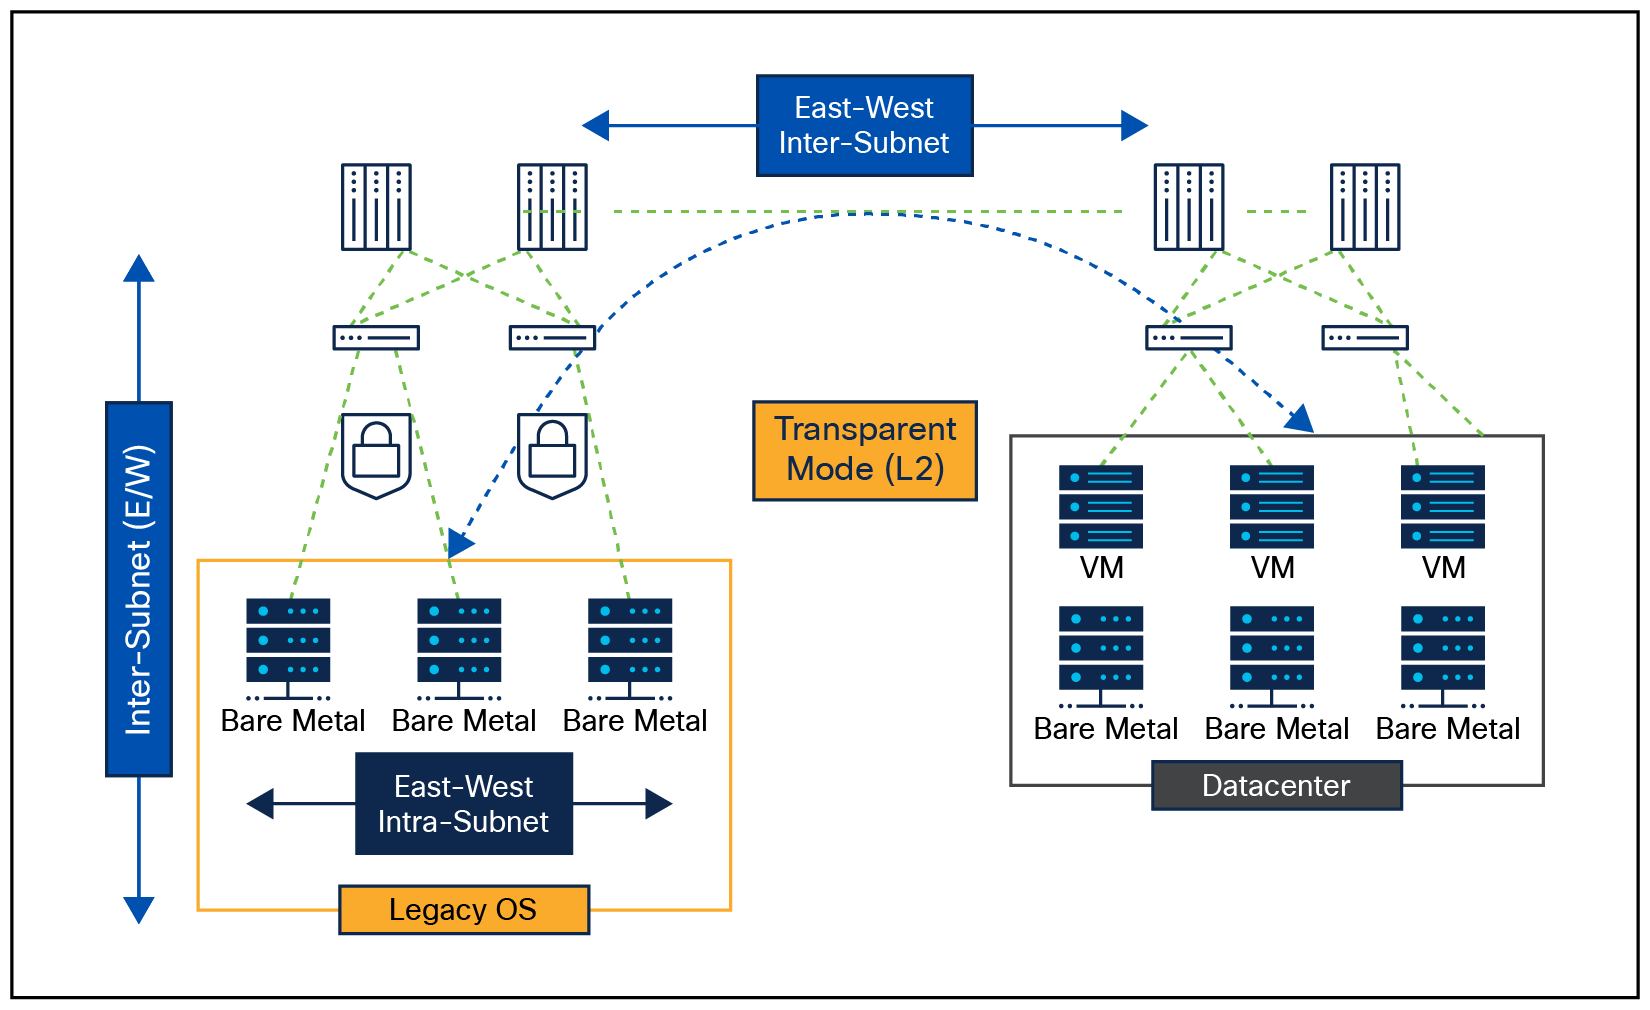 Network Microsegmentation for Agentless Workloads with Layer 2 Firewall